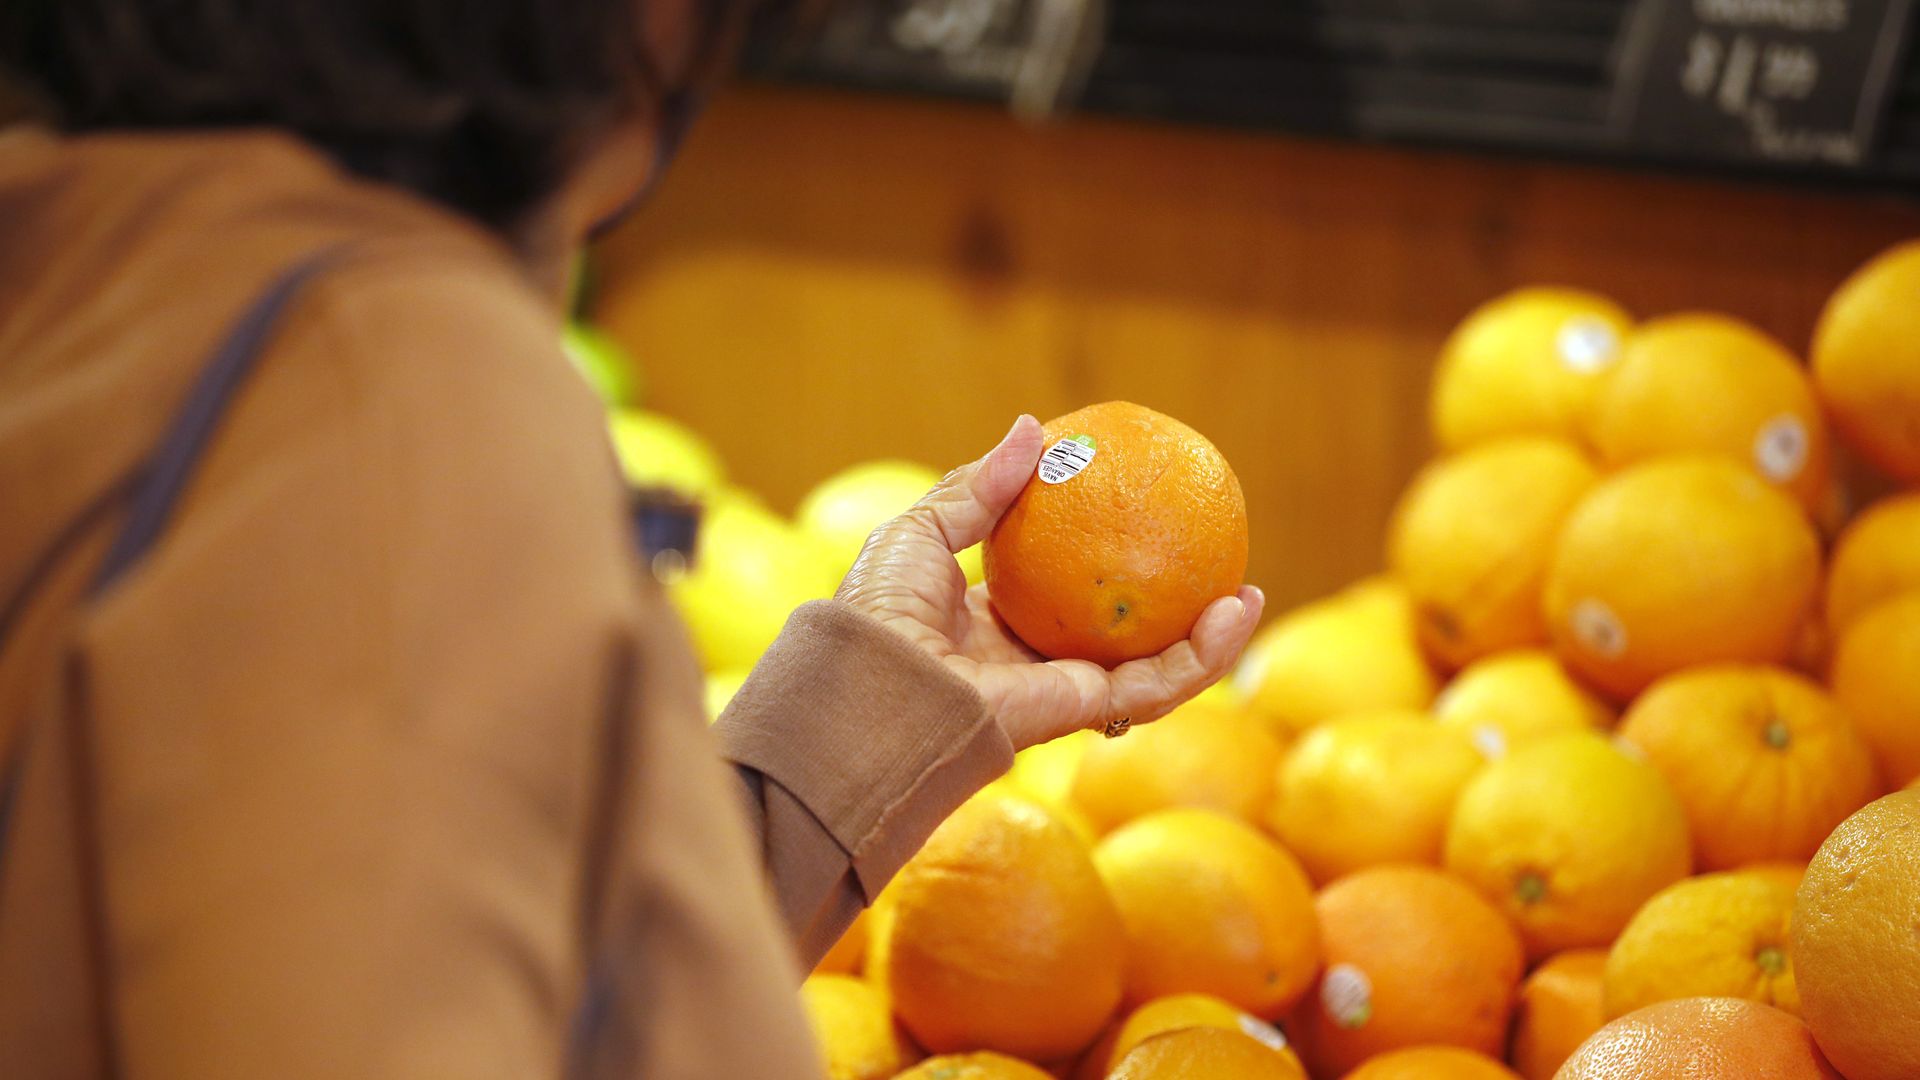 A woman shops for oranges in a supermarket.